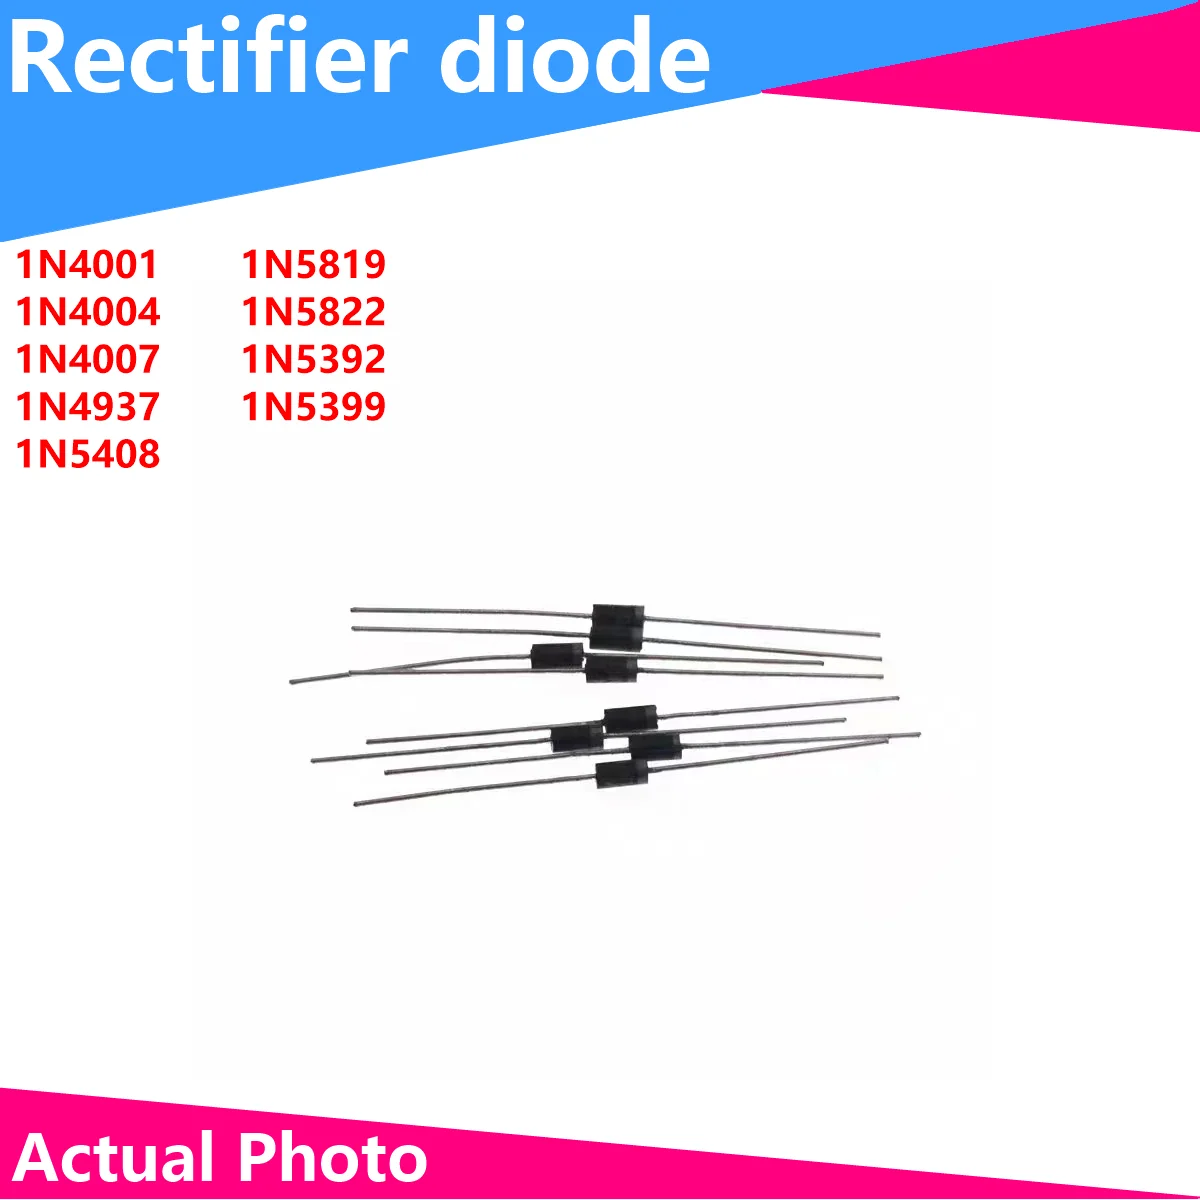 100/50PCS DIODE 1N4001 1N4004 1N4007 1N4937 1N5408 1N5819 1N5822 1N5392 1N5399 10pcs lot 1n4007 10a10 1n5408 1n5819 1n4001 5822 rectifier diode level in4007 plug in